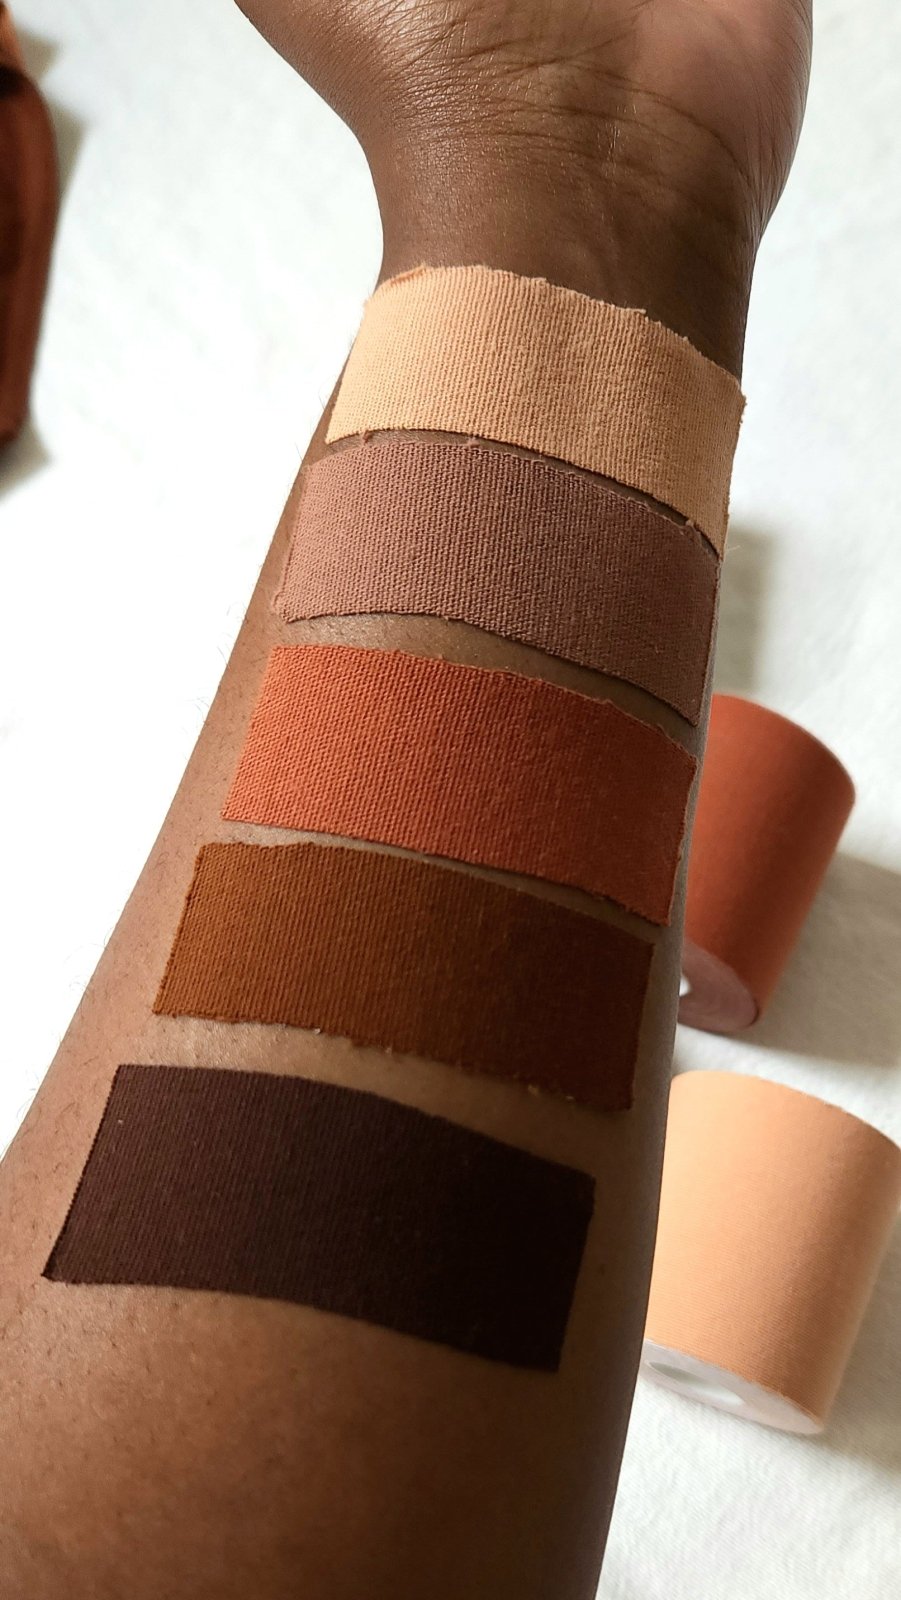 Boob tape swatches on a dark brown woman's skin.